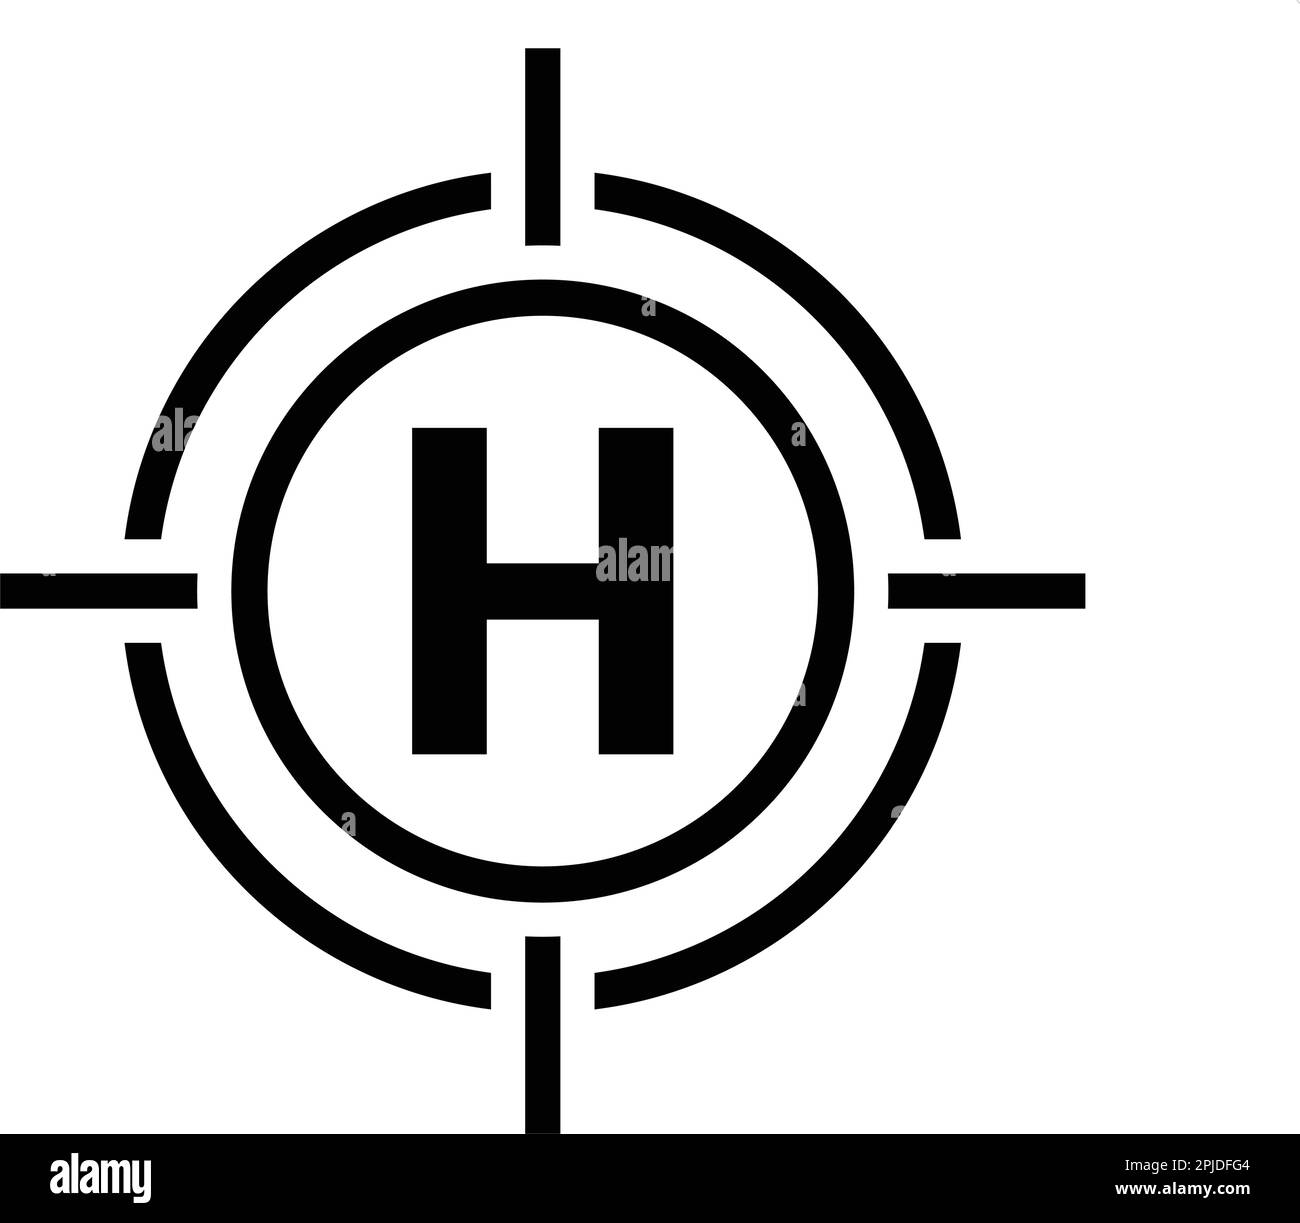 helicopter pad icon vektor illustration Stock Vector